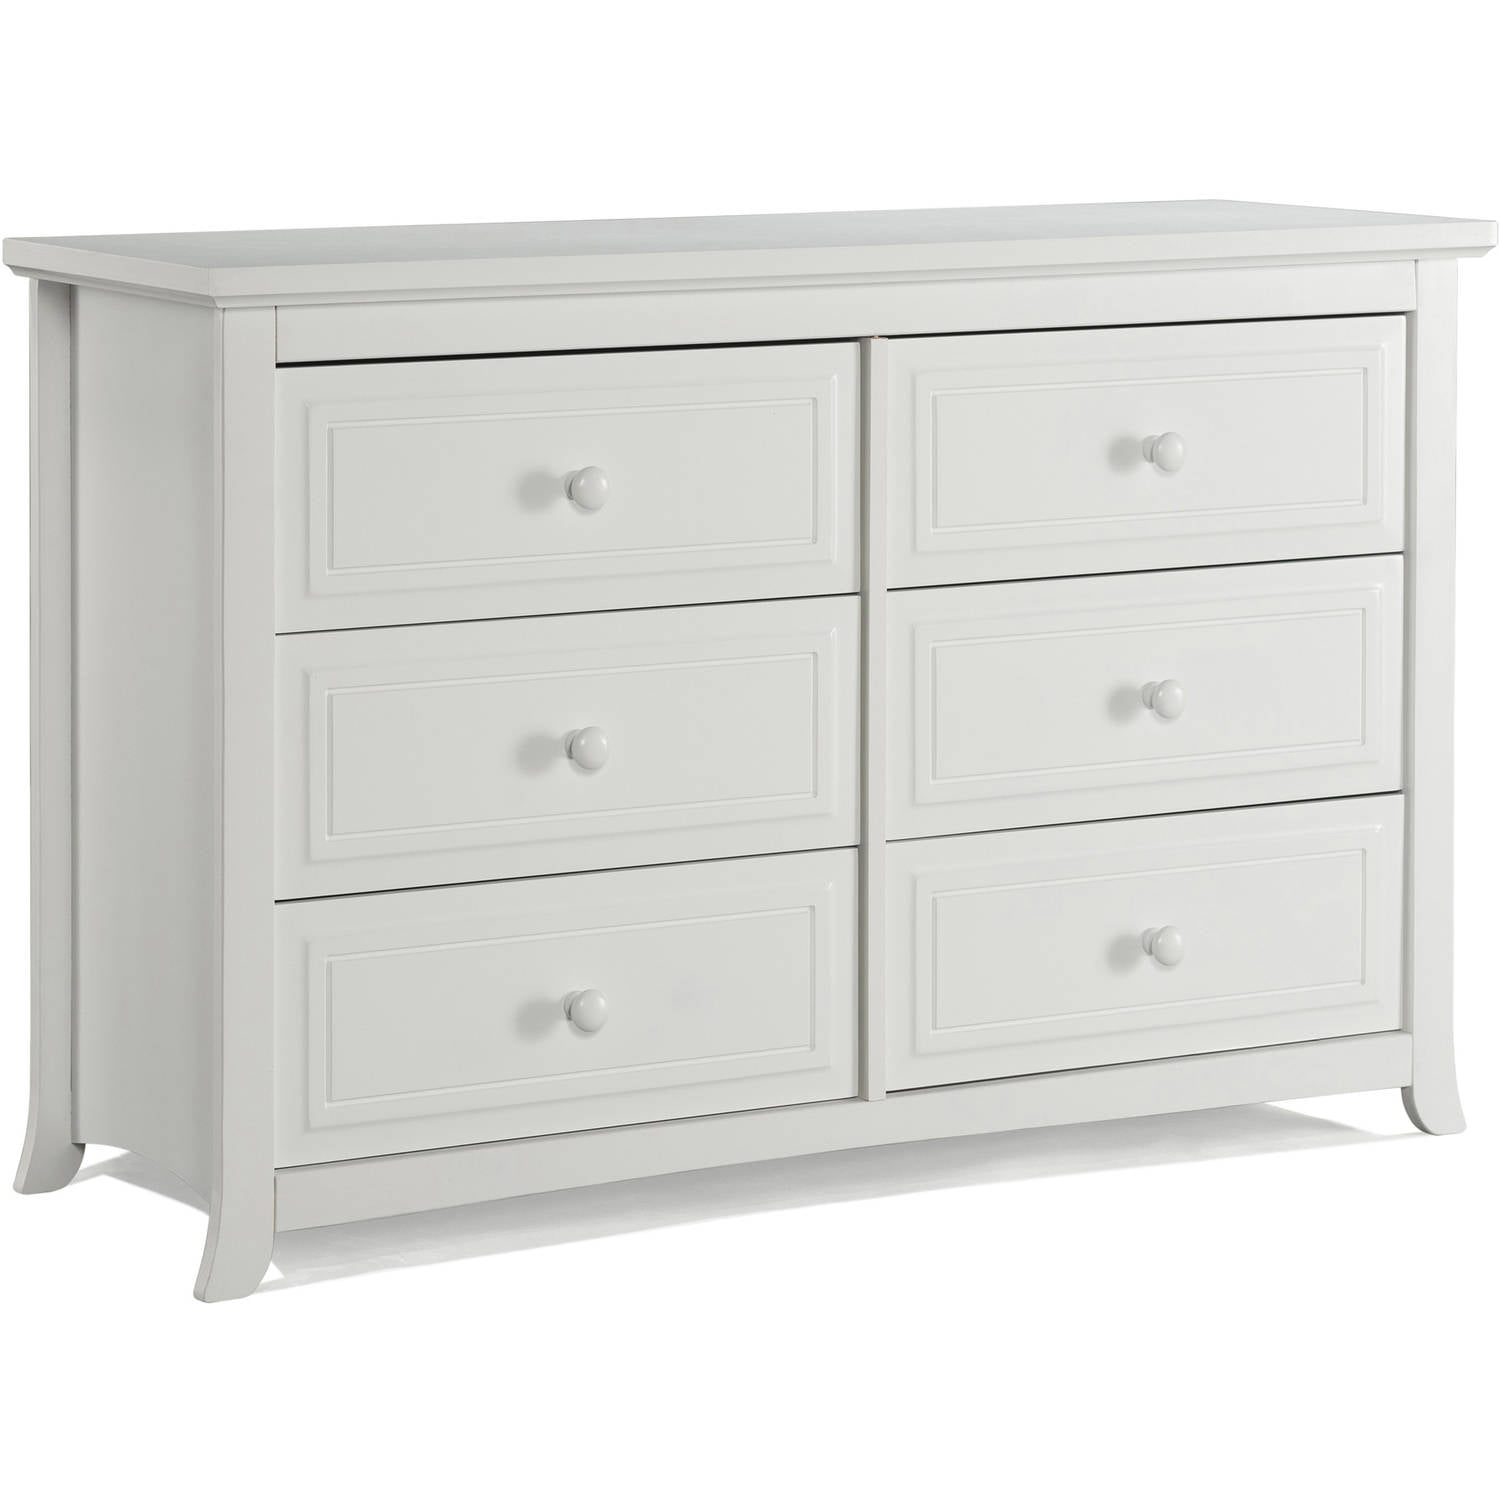 Graco Kendall 6 Drawer Double Dresser 